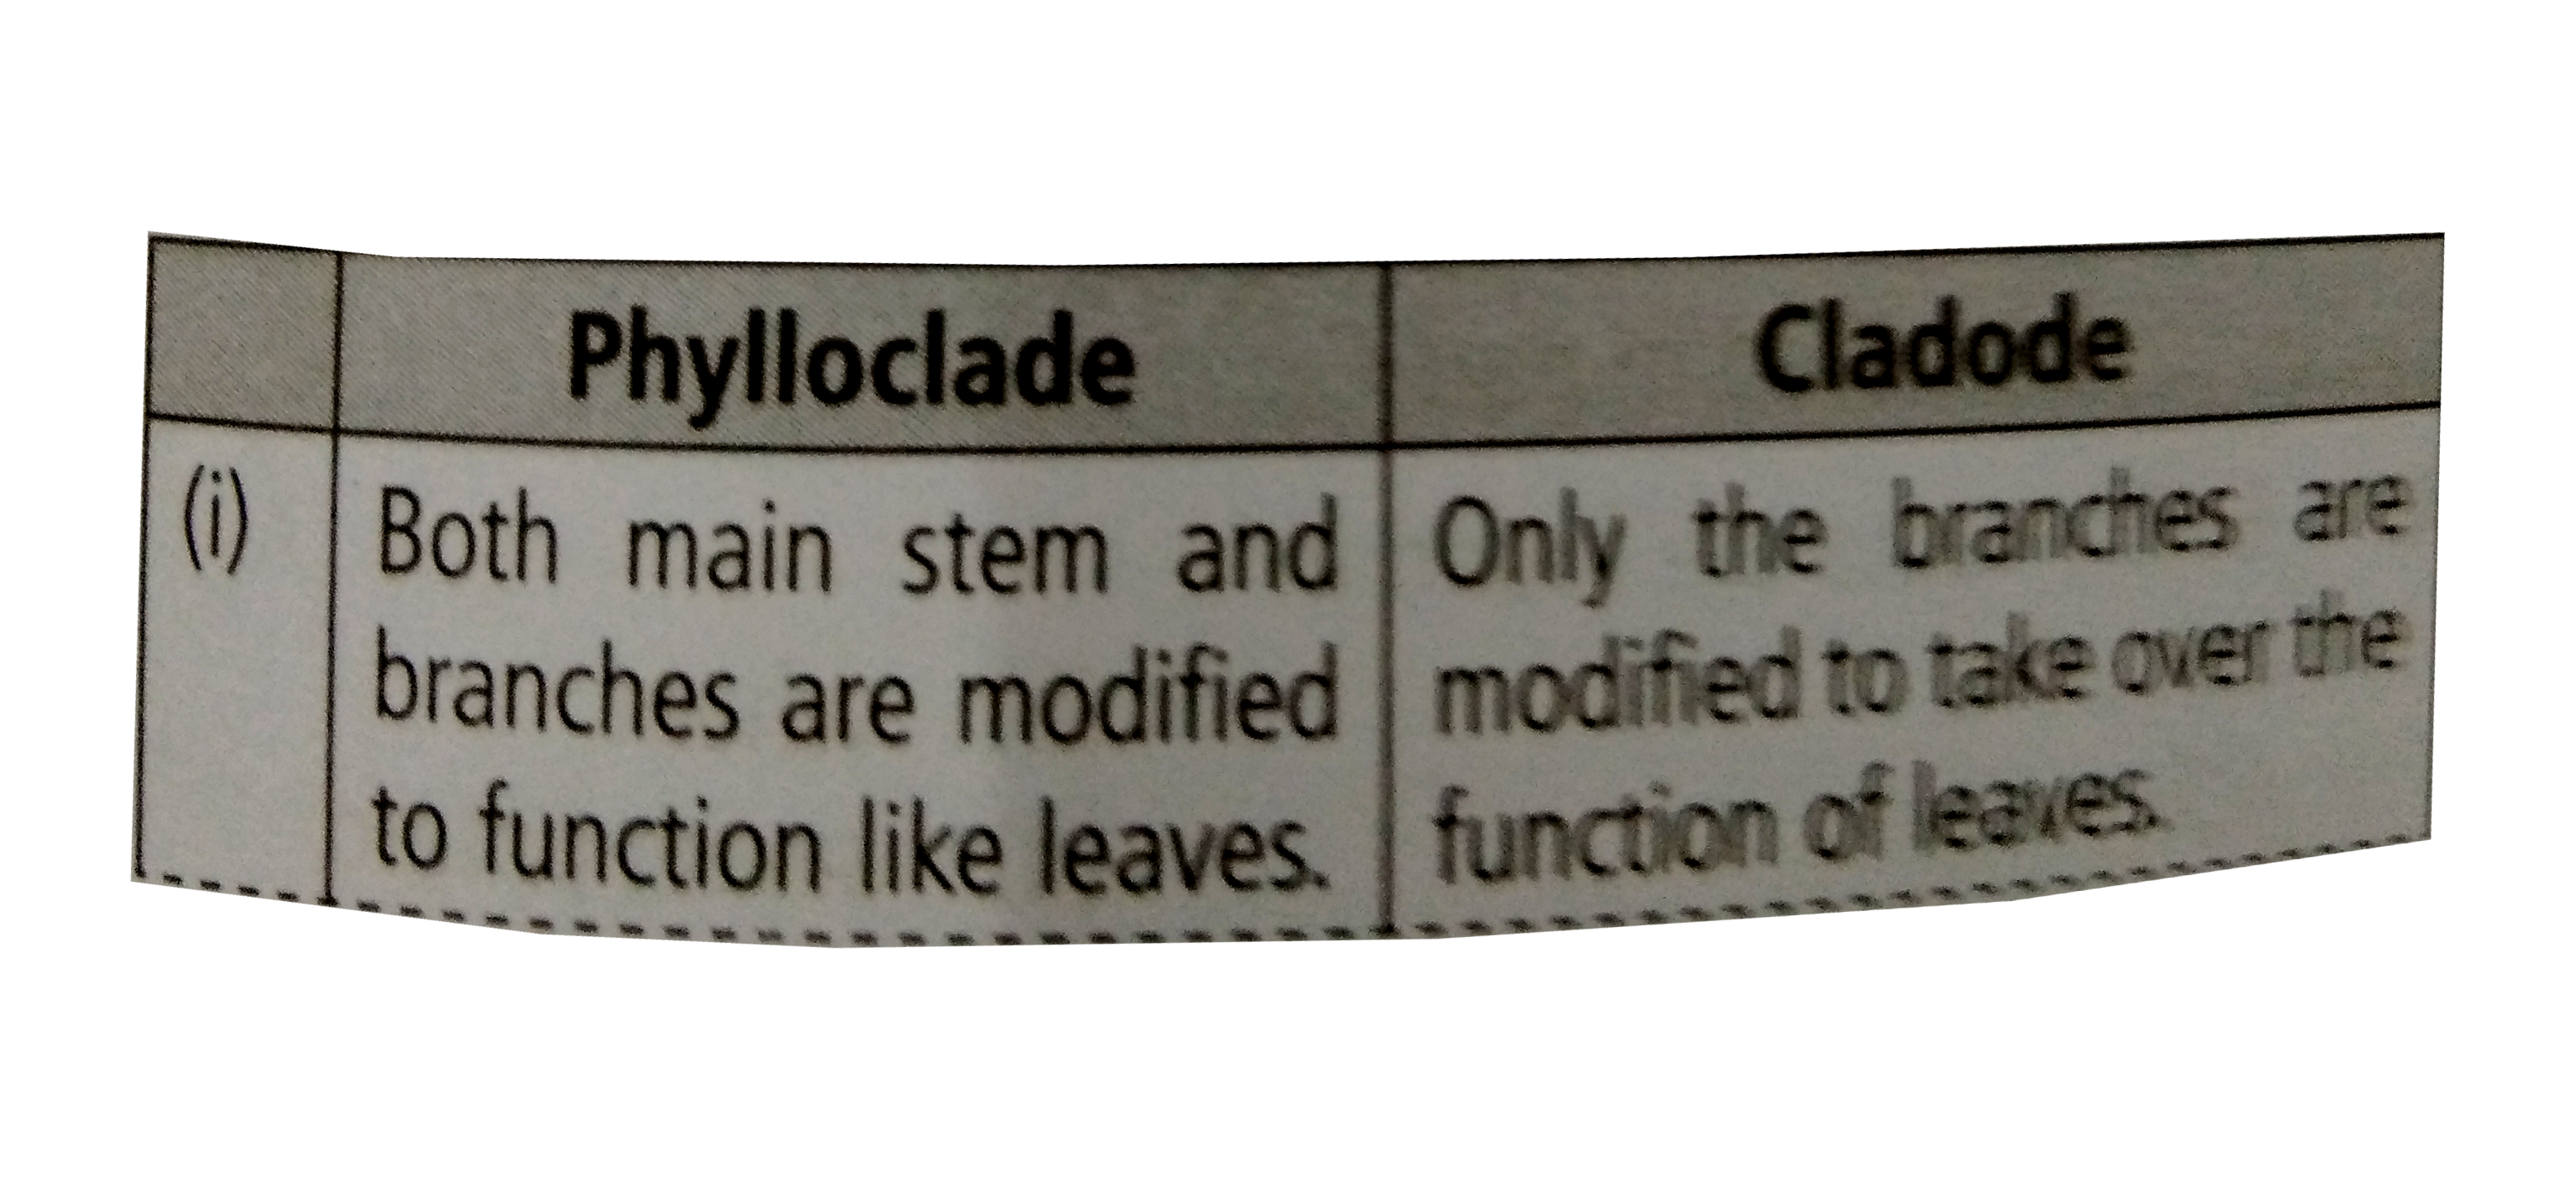 Following table summerises the comparisions between phylloclades and cladodes (cladophylls).          Pick up the wrong differences and select the correct option